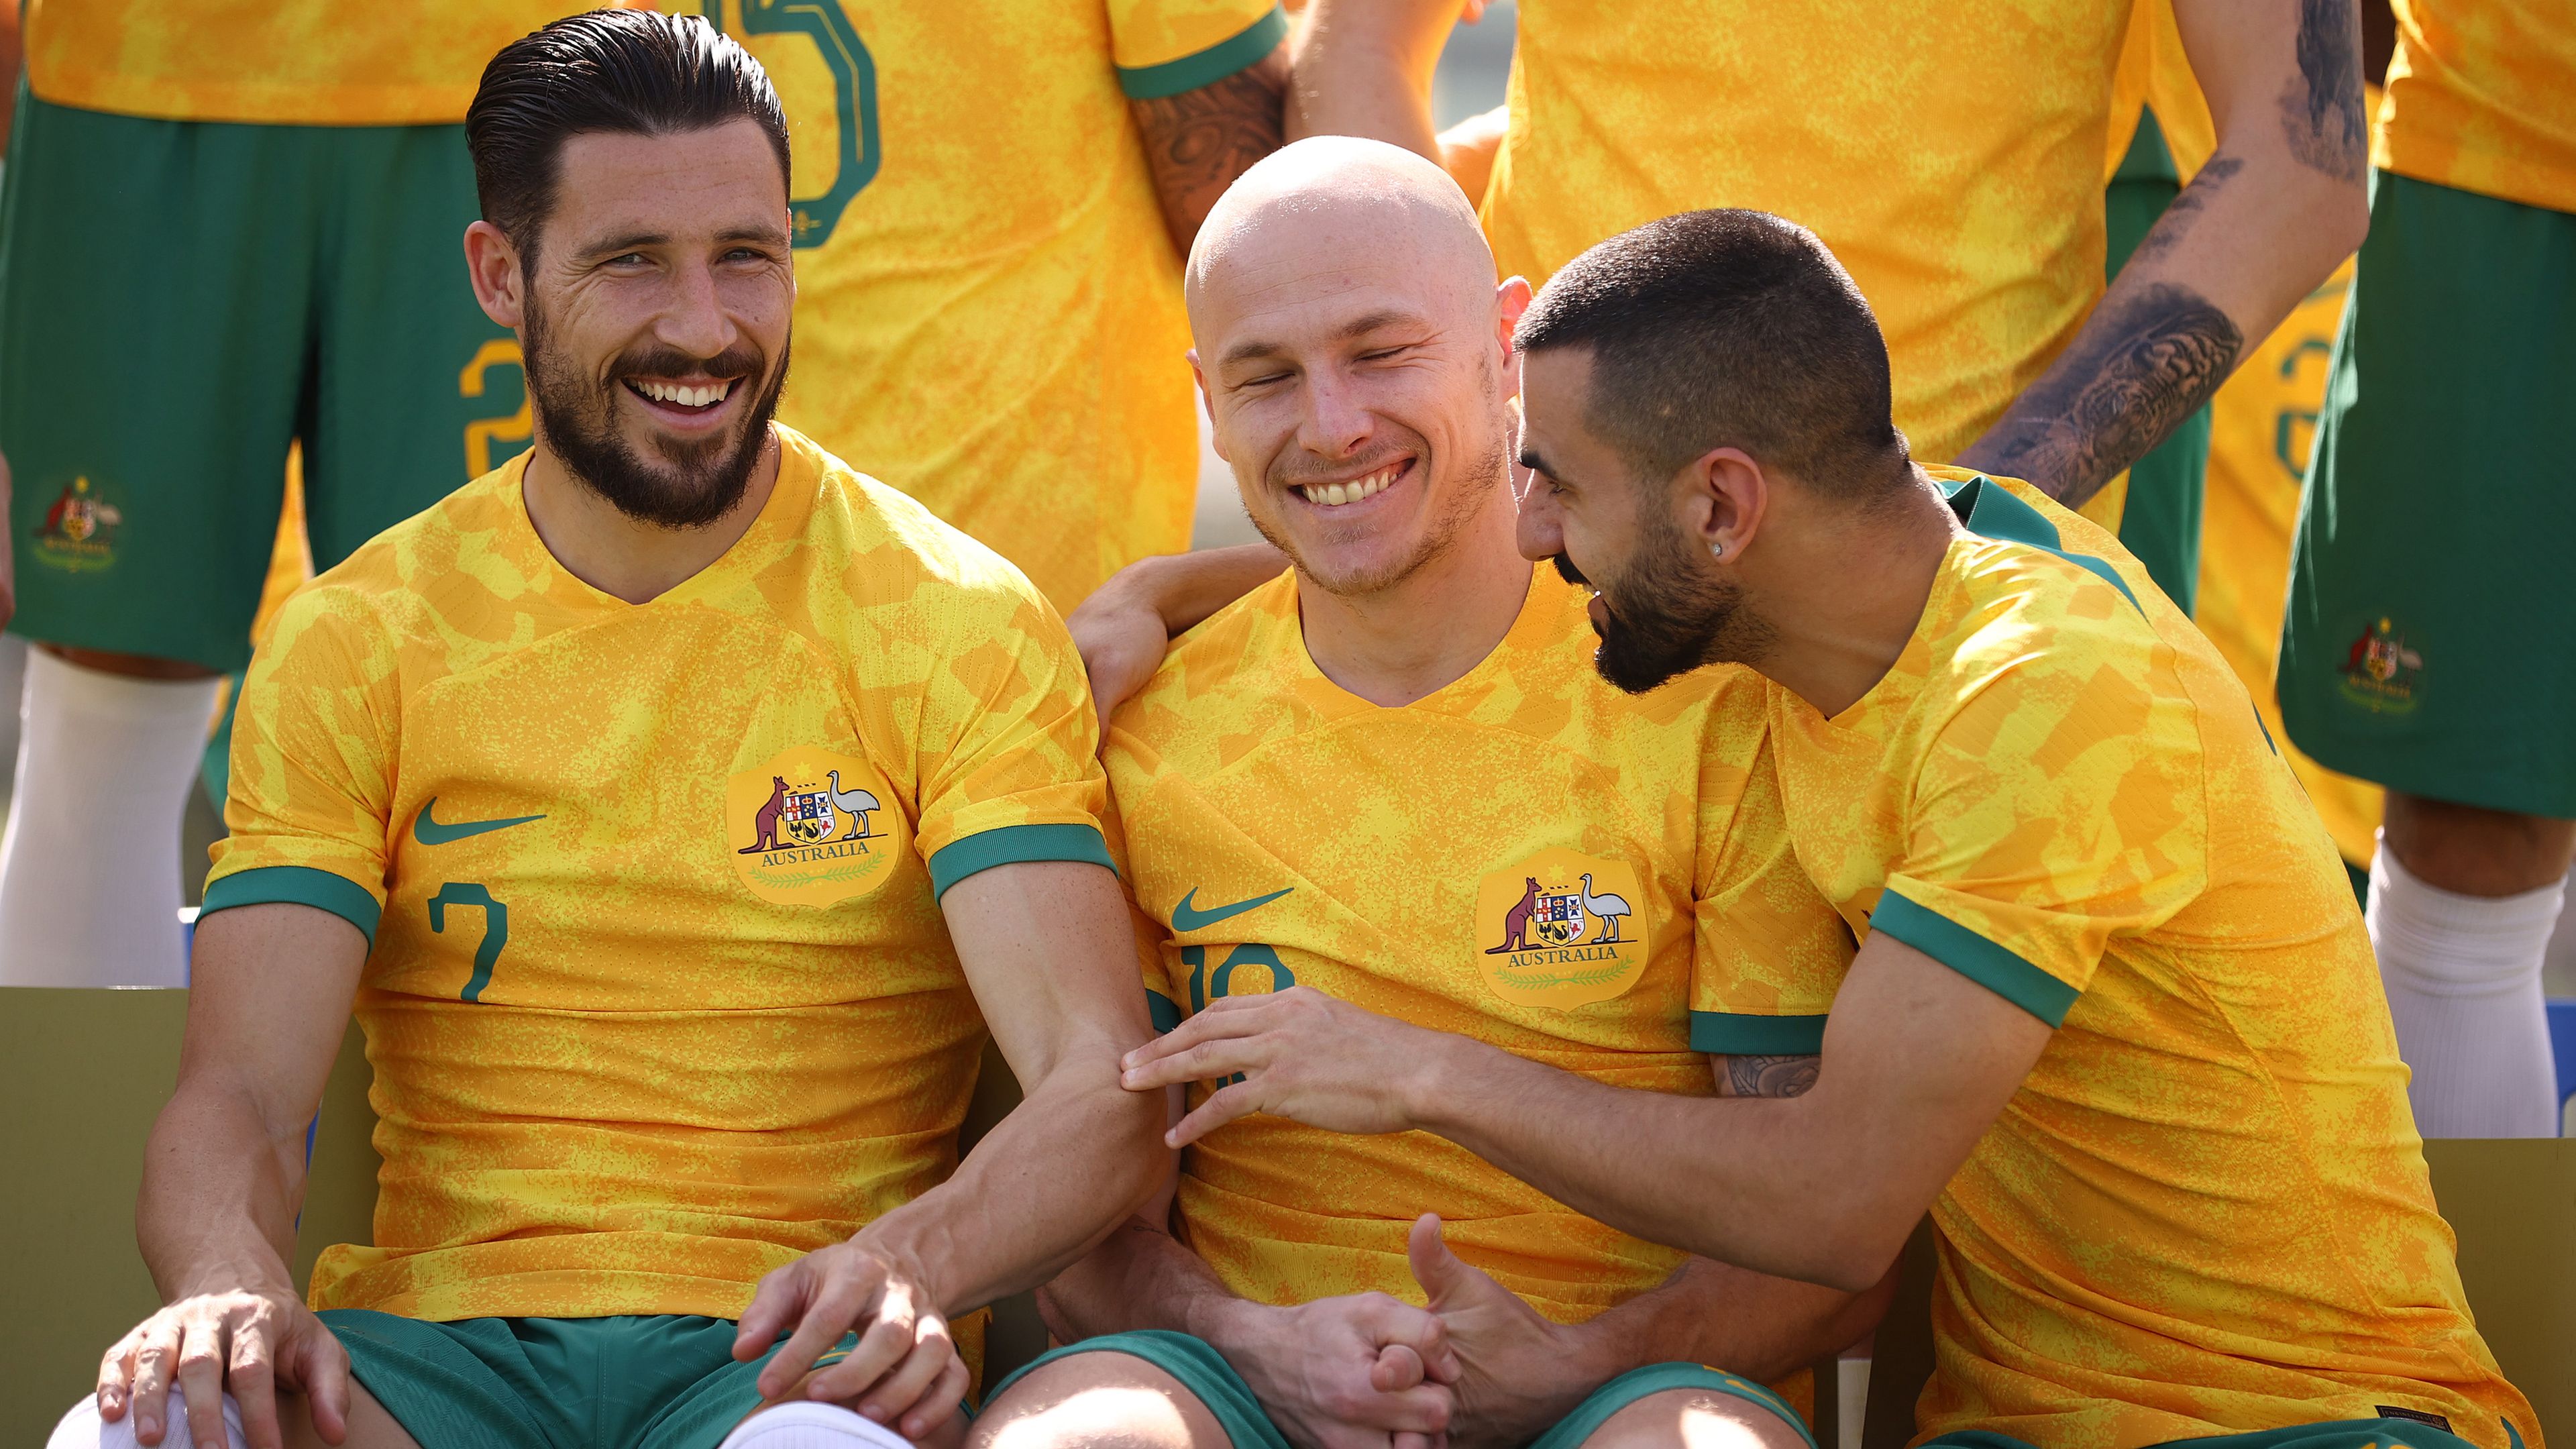 Socceroos fixtures guide: Everything you need to know to cheer on Australia in Qatar